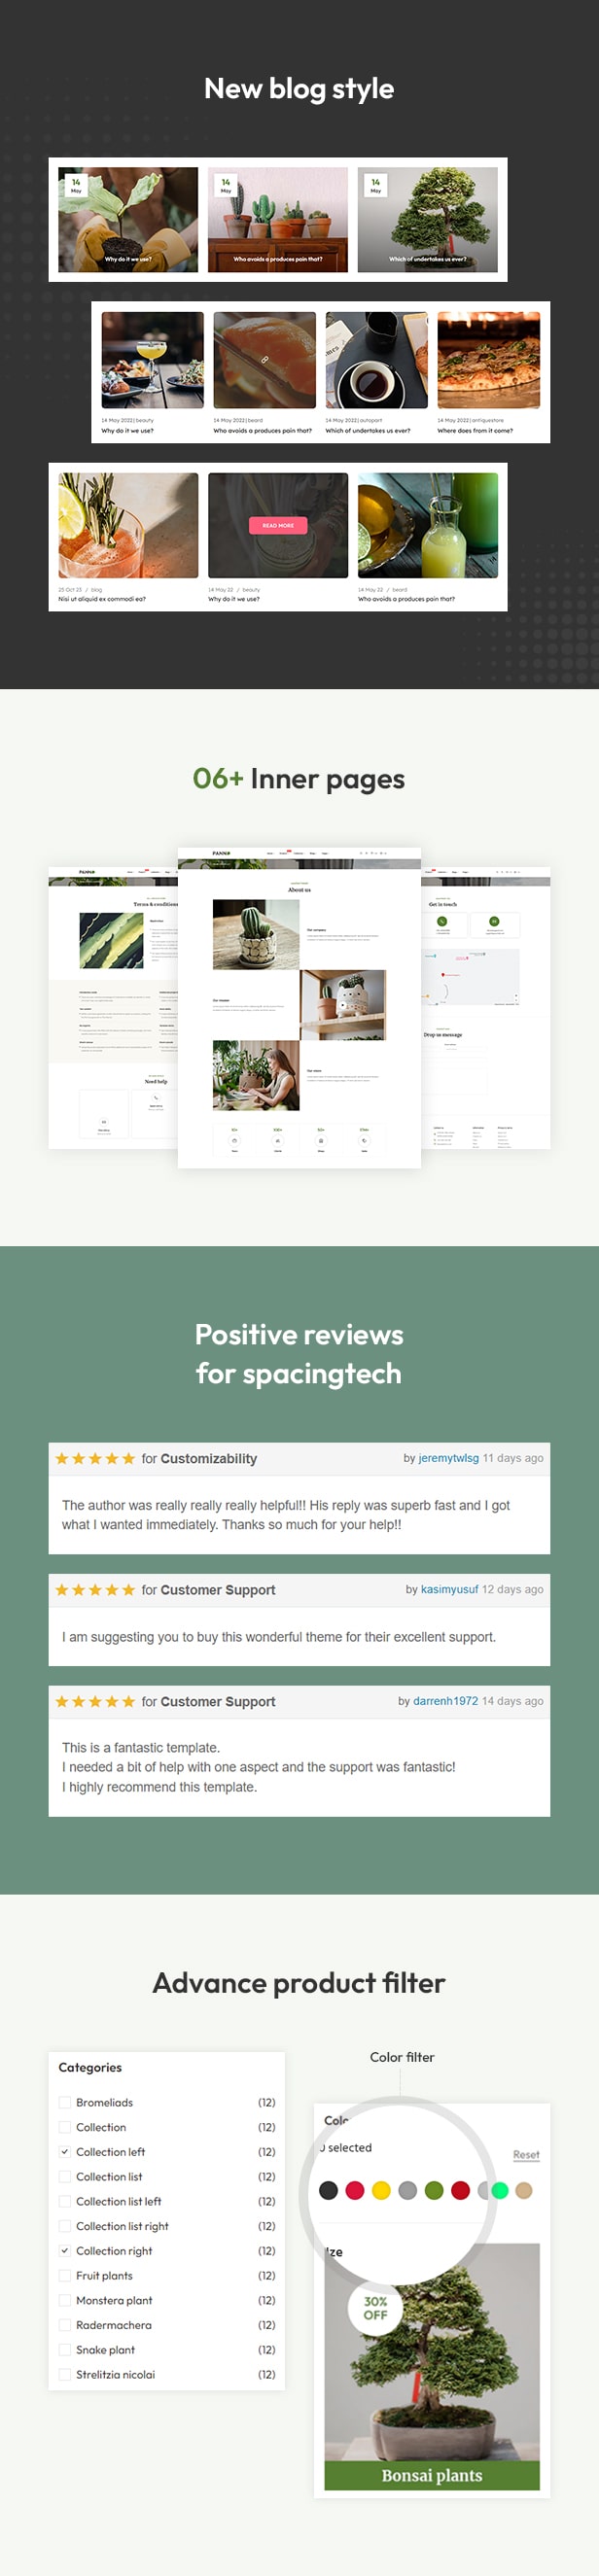 Panno - The Plants & Organic Food eCommerce Shopify Theme - 4